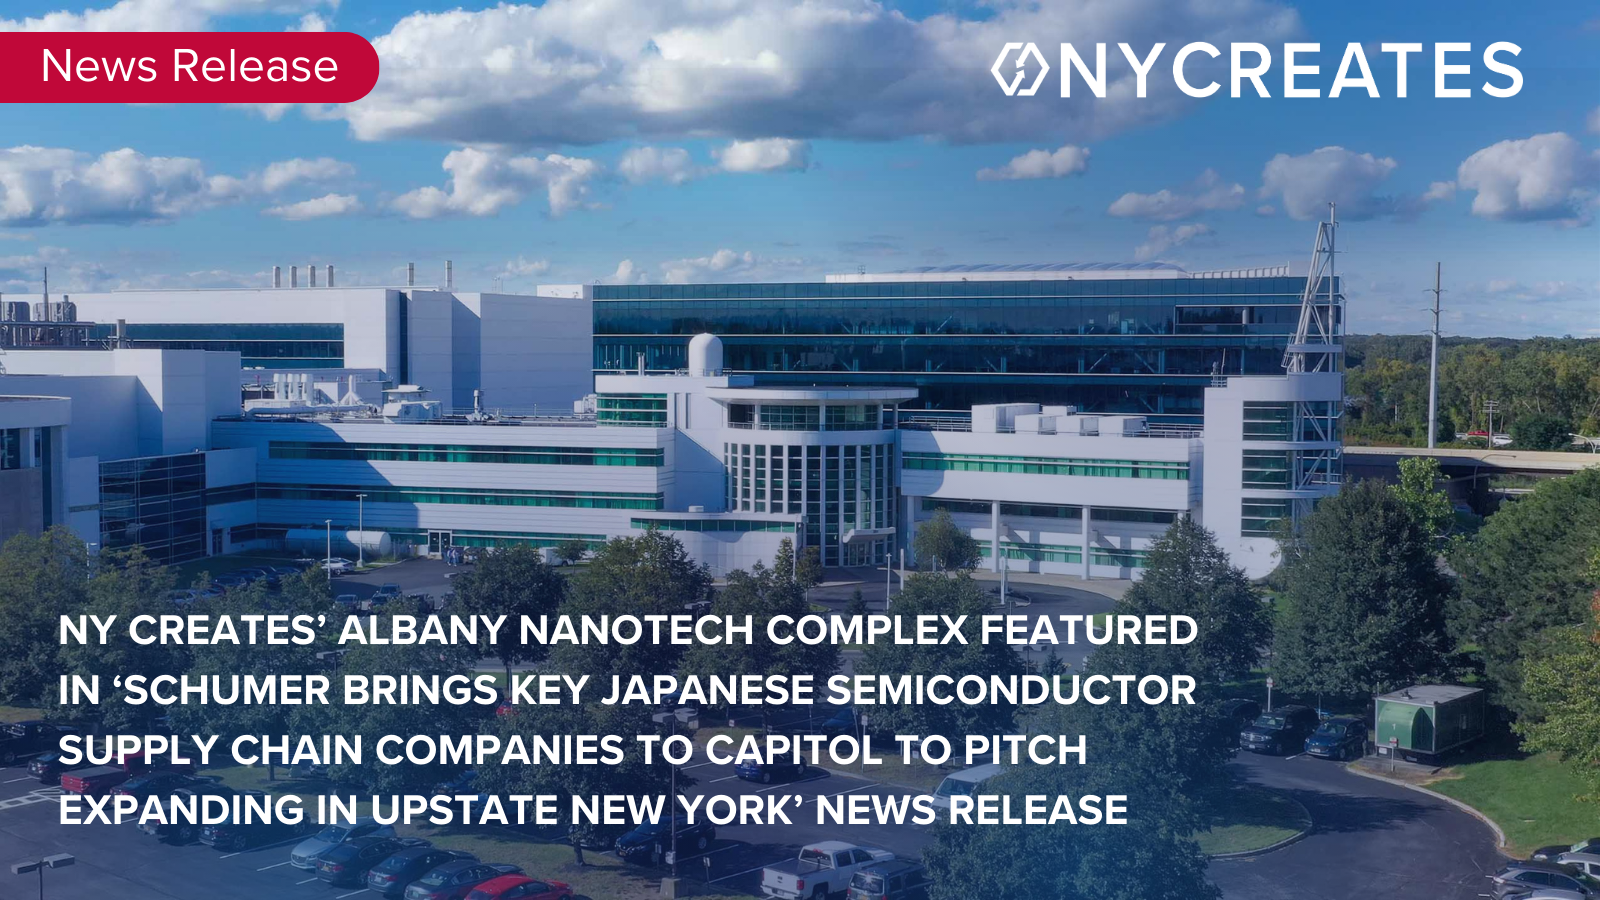 NY CREATES' Albany NanoTech Complex featured in 'Schumer Brings Key Japanese Semiconductor Supply Chain Companies to Capitol to Pitch Expanding in Upstate New York' news release